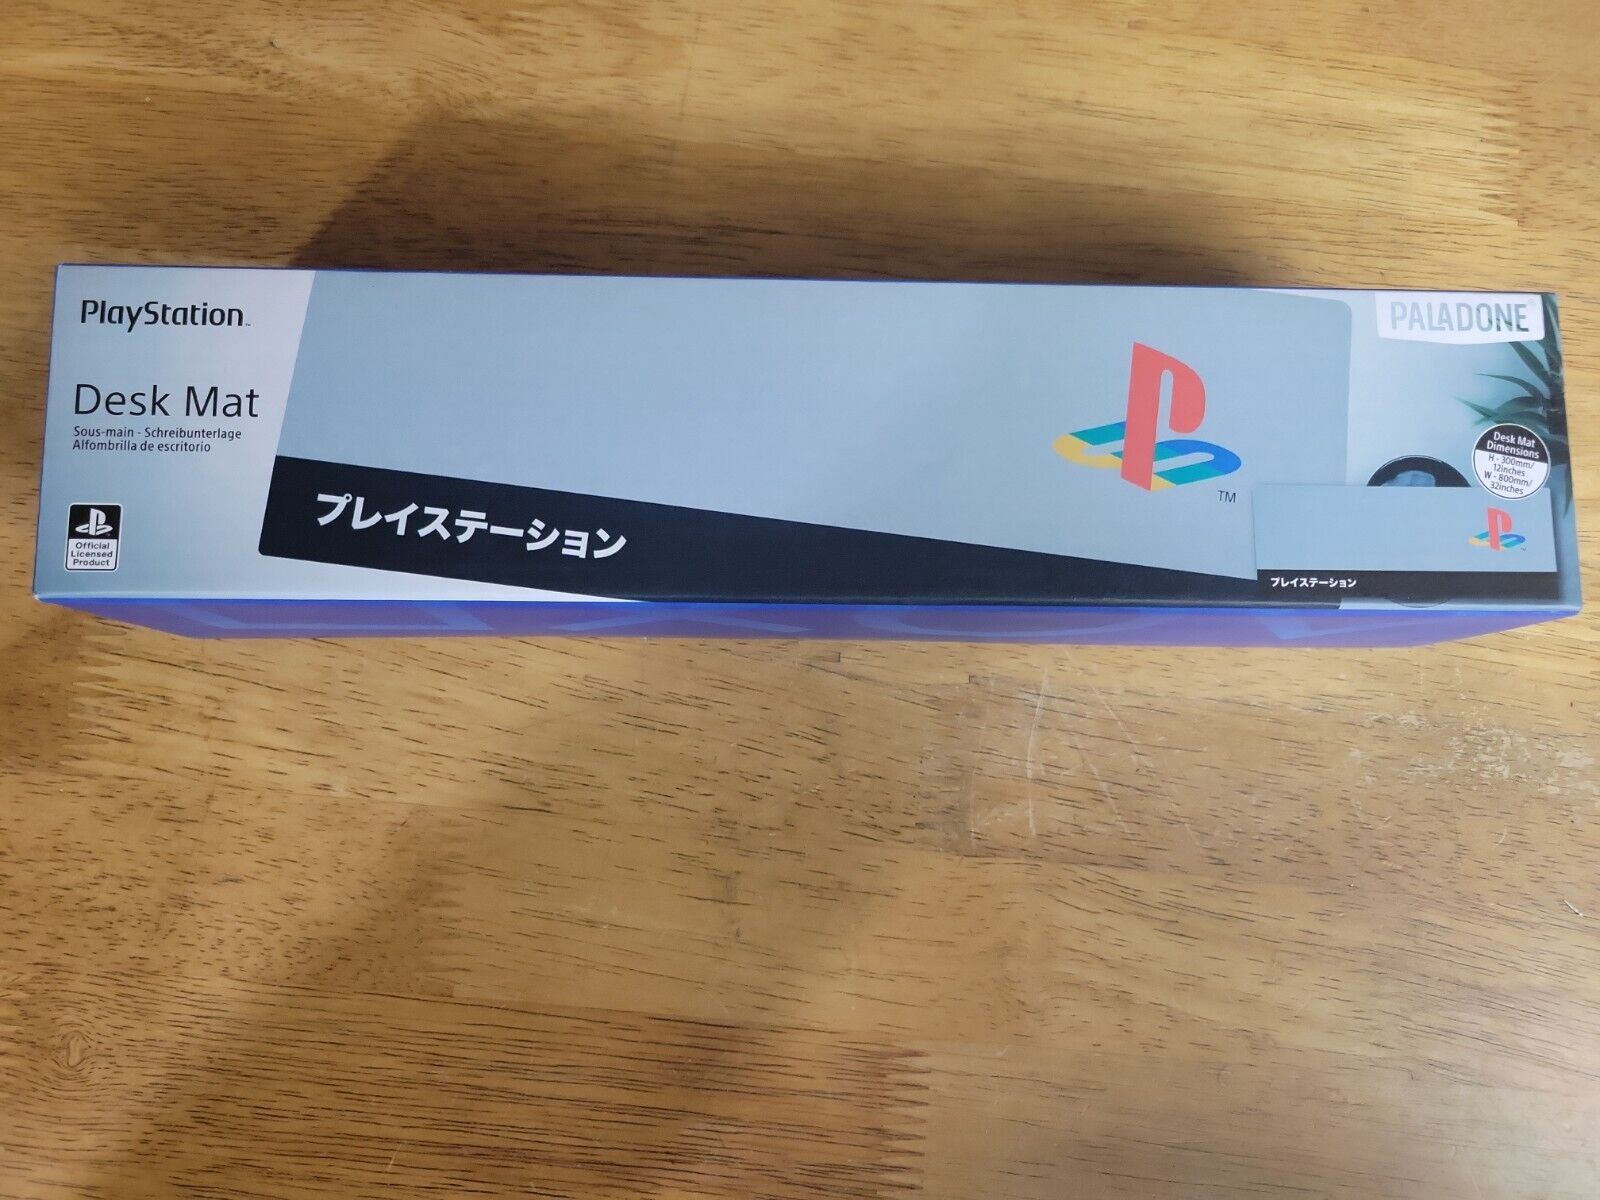 Playstation Japanese Heritage Desk Mat 30x80cm 12x32in Damaged Box New in Box